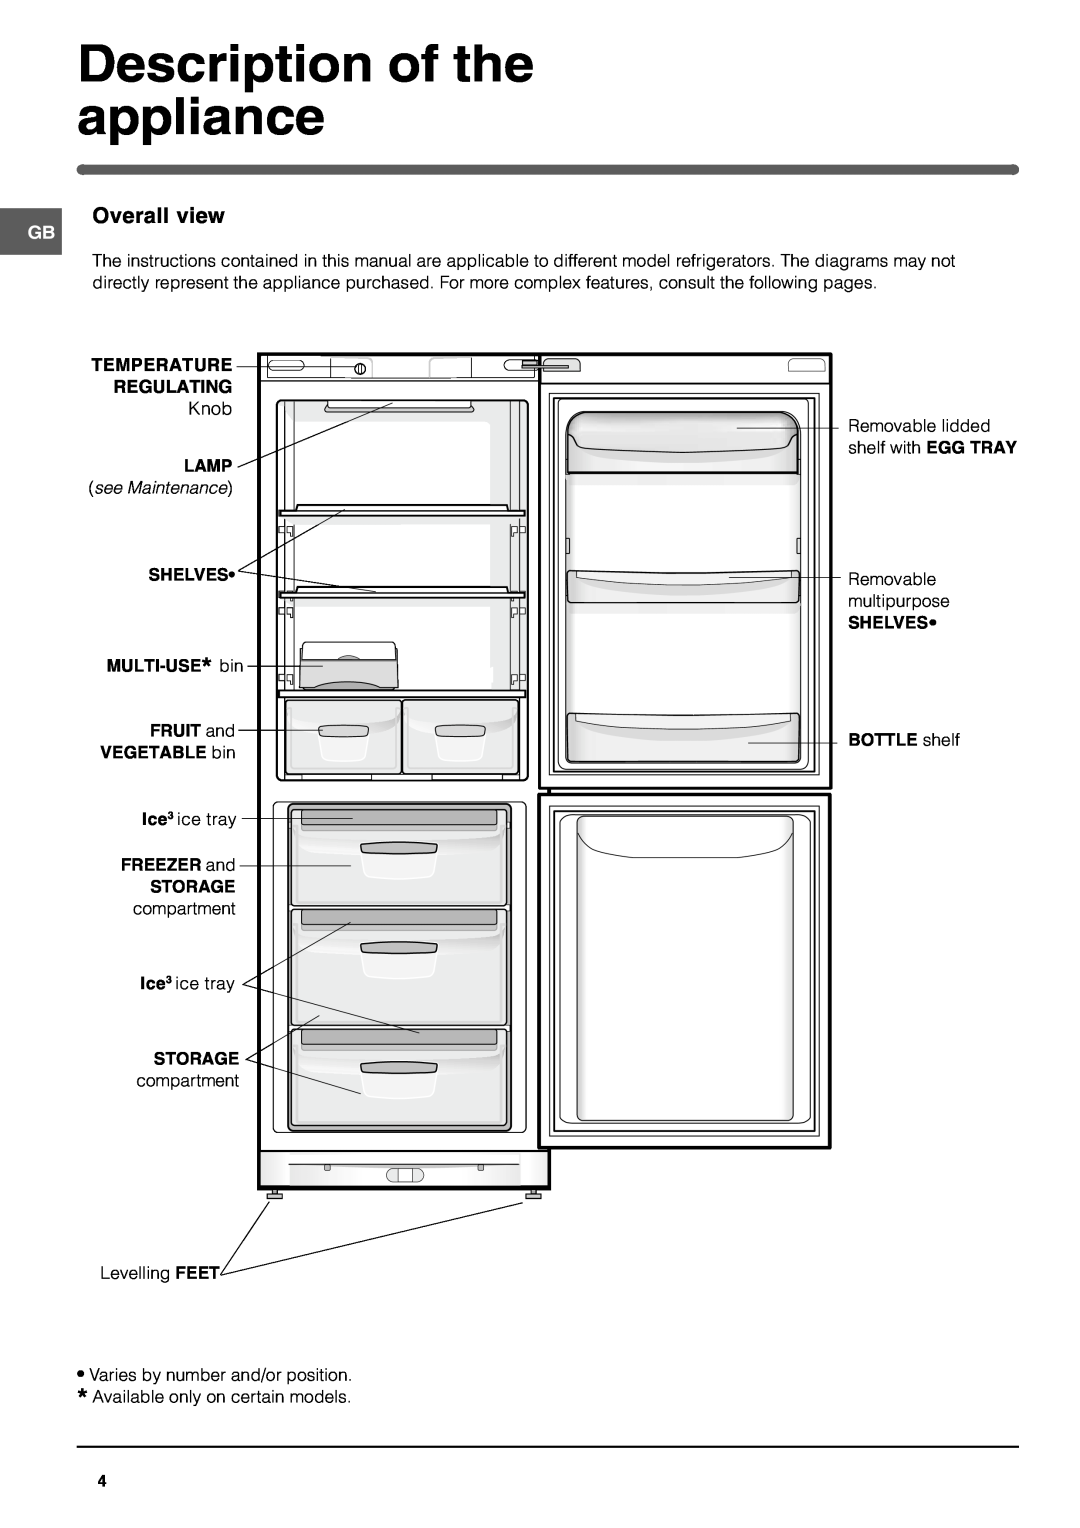 Indesit BAAN 12s Description of the appliance, Overall view, Temperature, Regulating, Lamp, see Maintenance, VEGETABLE bin 